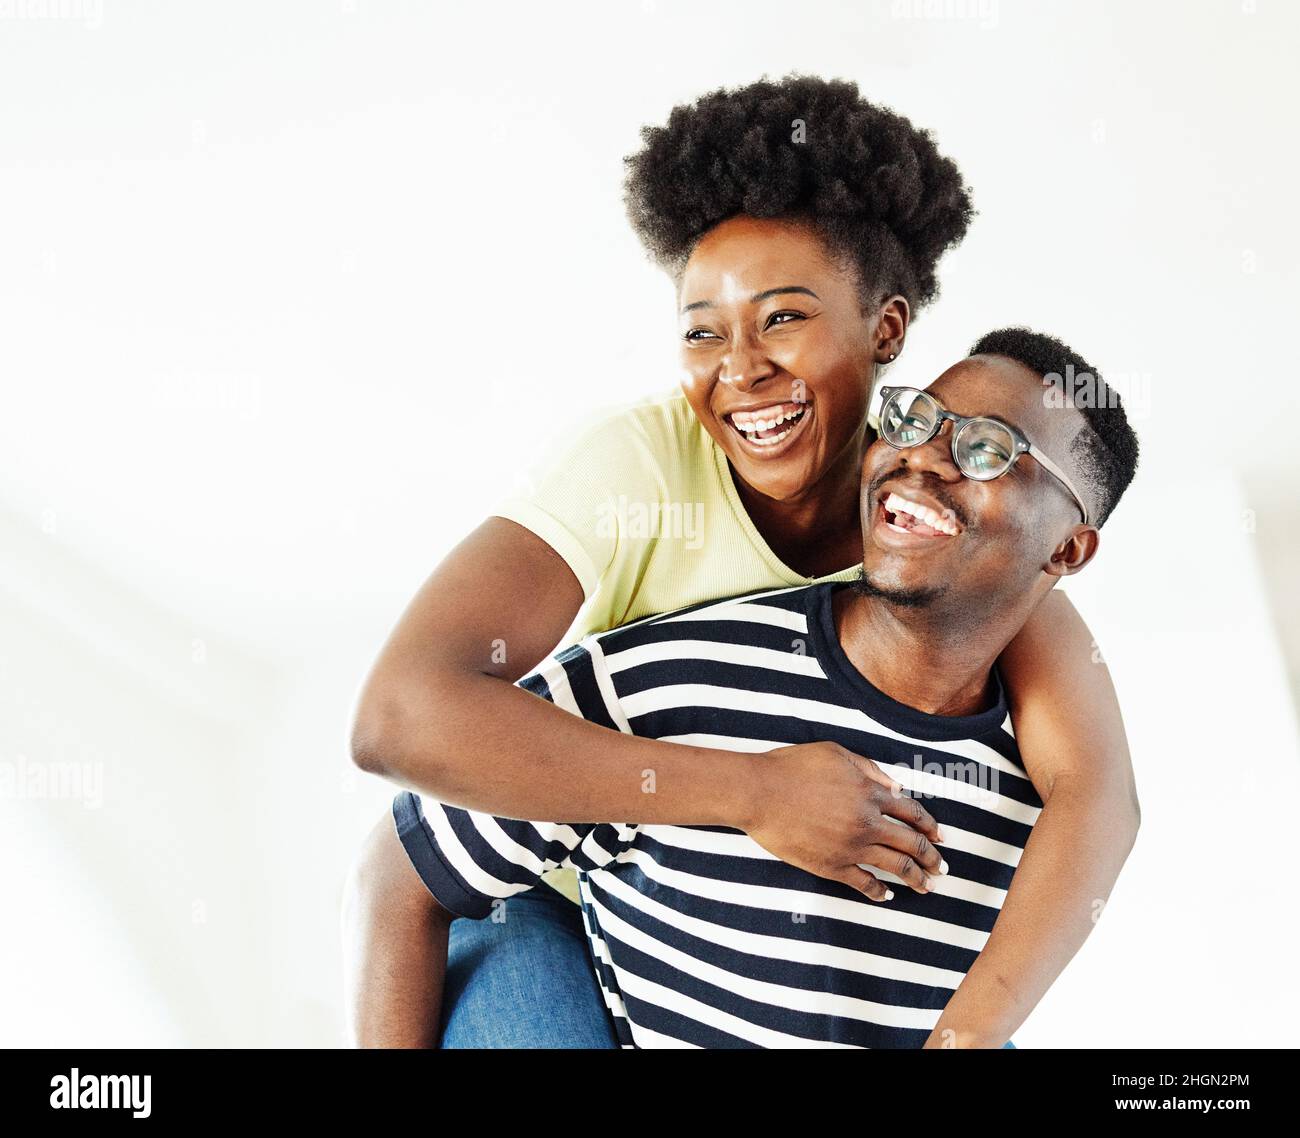 woman couple man happy happiness love black young lifestyle together romantic boyfriend girlfriend laughing hug piggyback Stock Photo